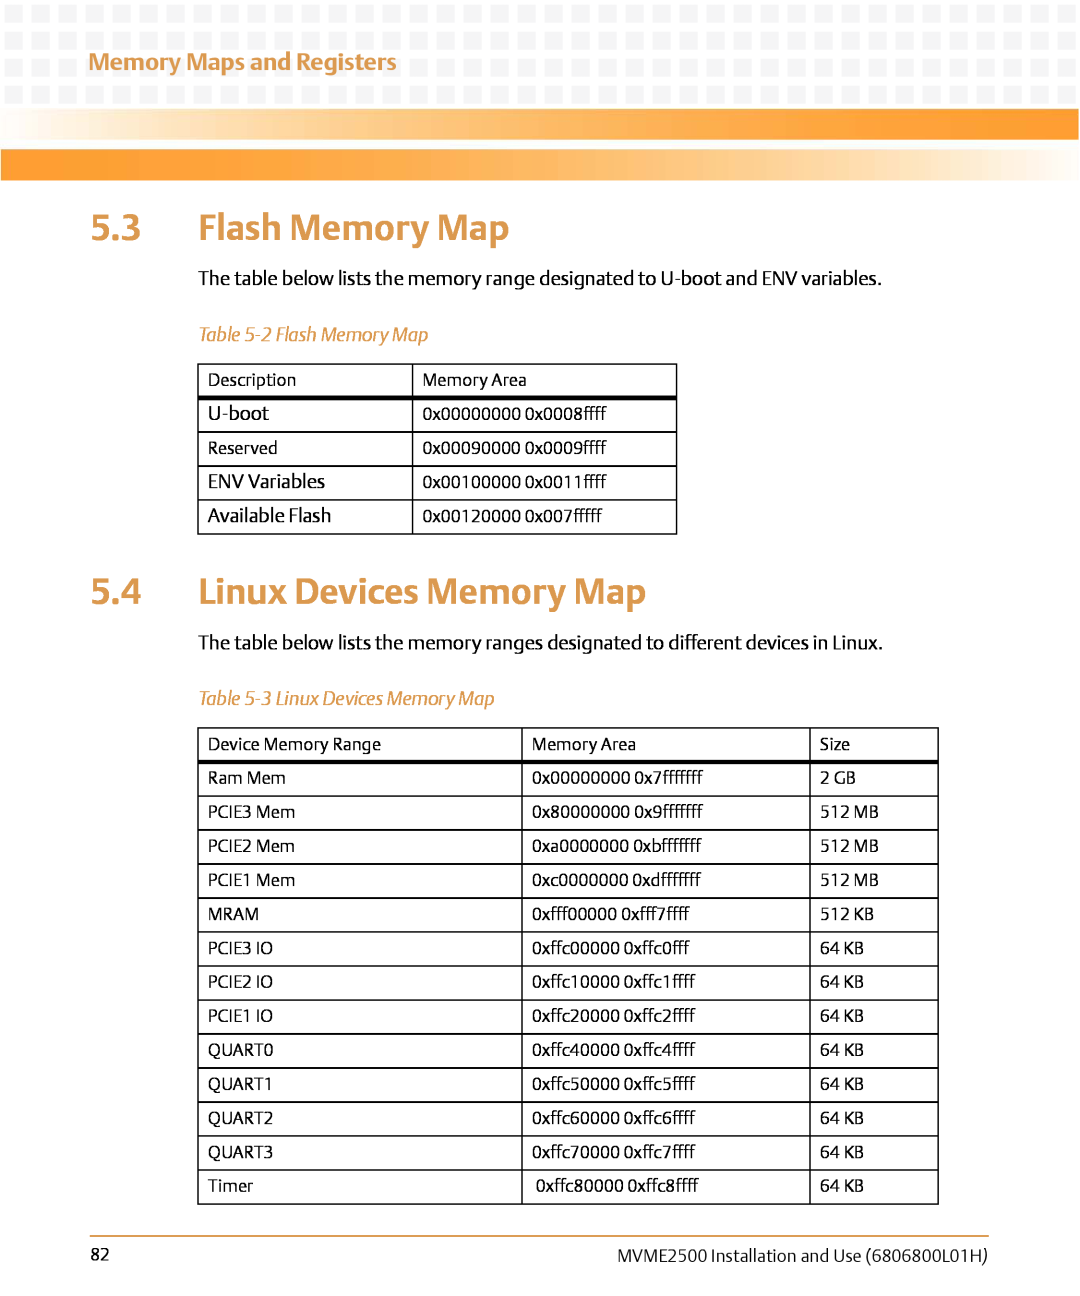 Emerson MVME2500 manual Linux Devices Memory Map, Memory Maps and Registers, 2 Flash Memory Map 